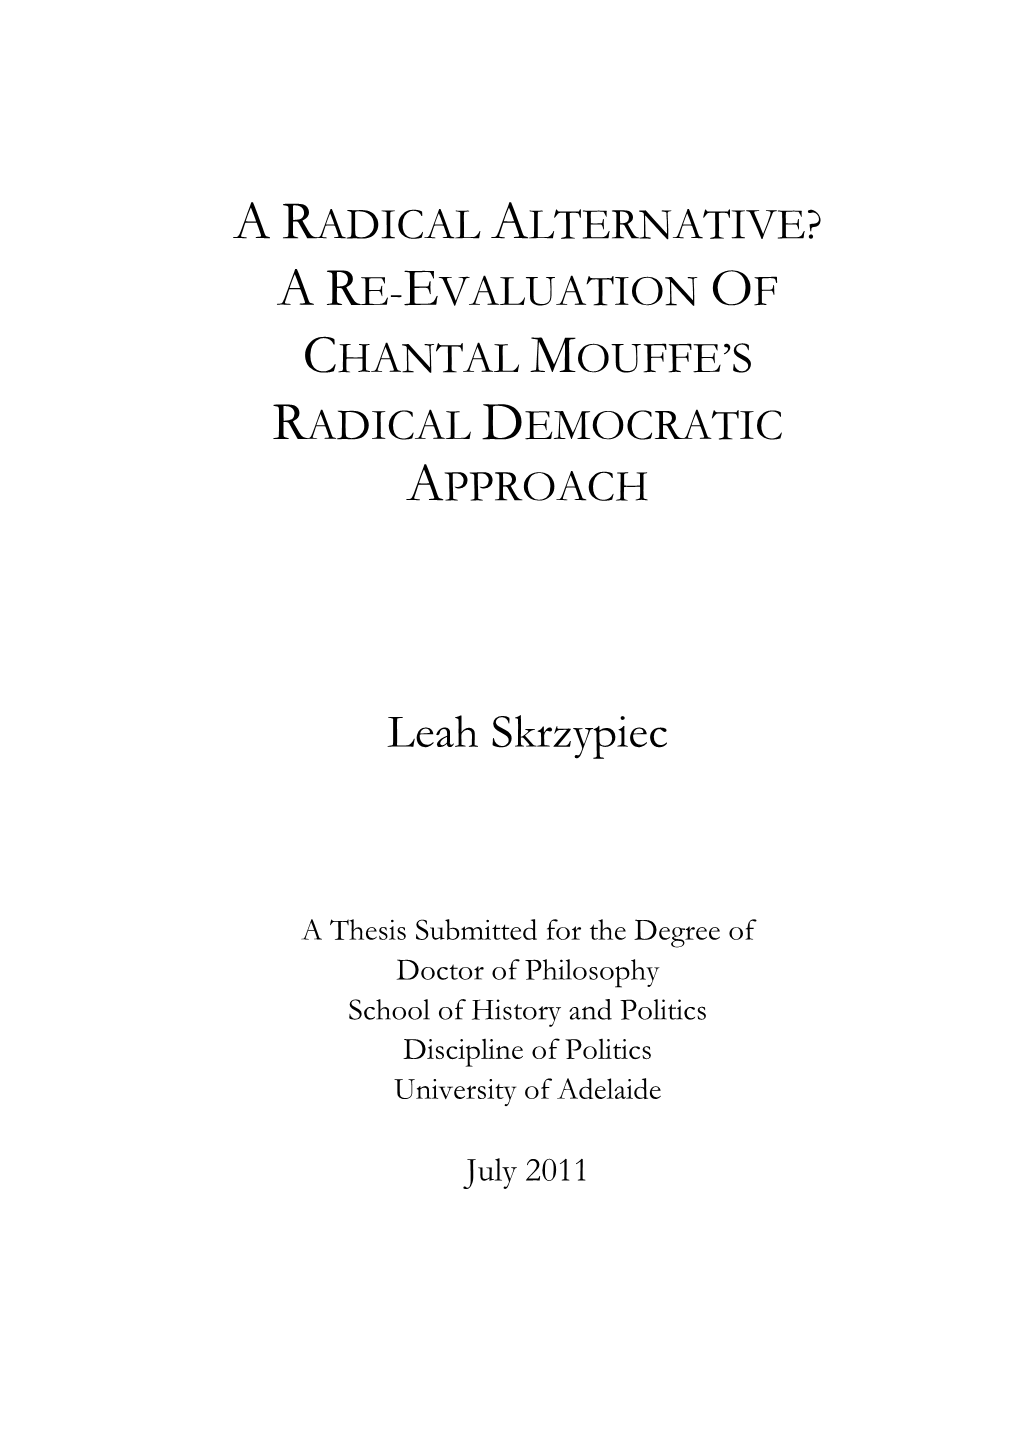 Are-Evaluation of Chantal Mouffe's Radical Democratic Approach